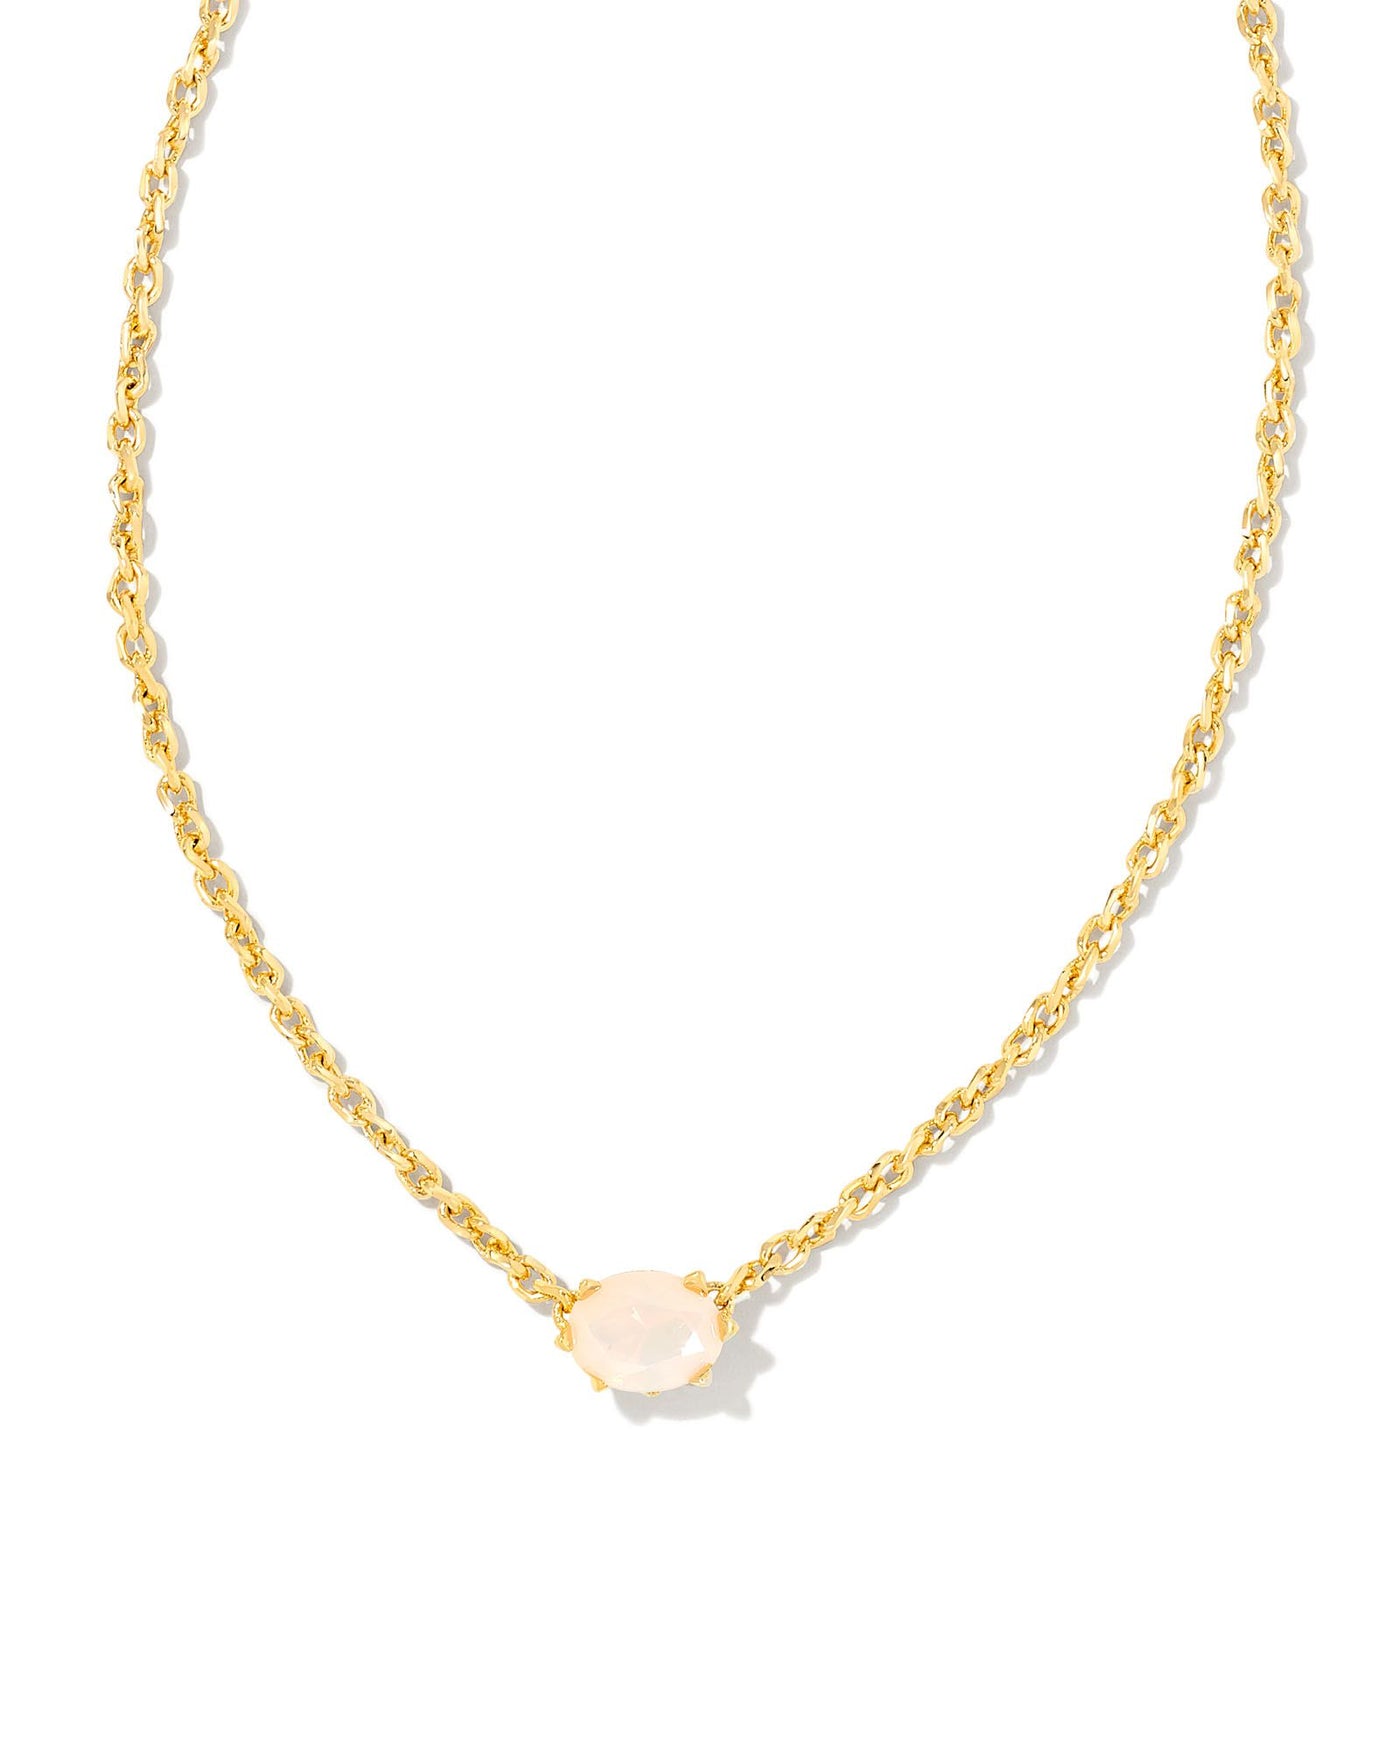 Cailin Crystal Pendant Necklace Gold Champagne Opal Crystal on white background, front view.